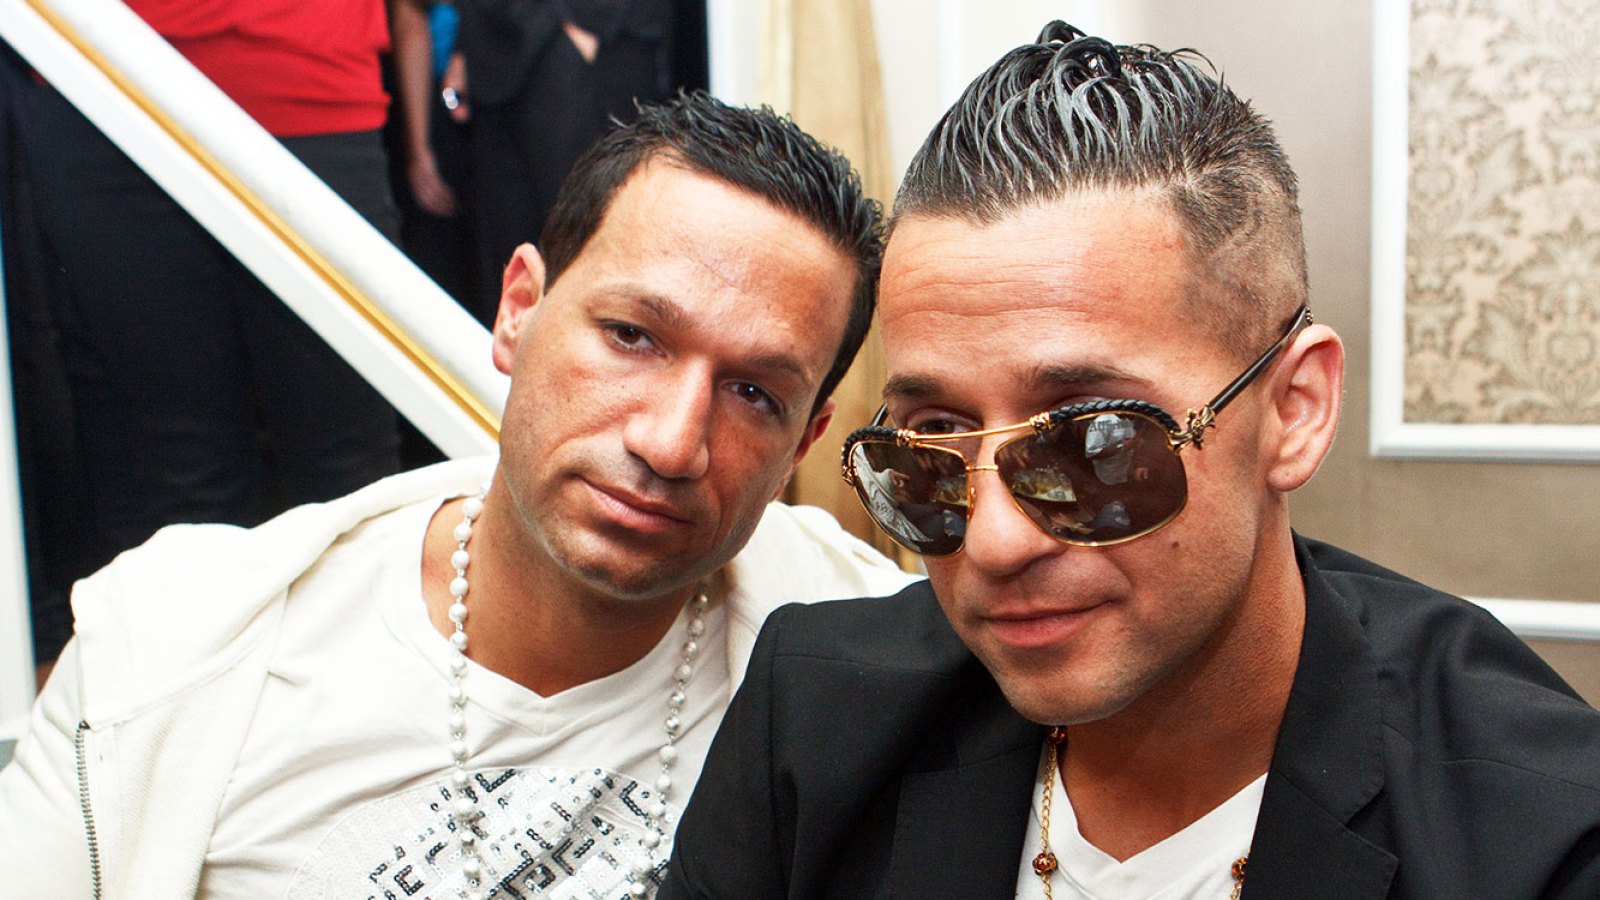 Mike ‘The Situation’ Sorrentino and his brother Marc Sorrentino